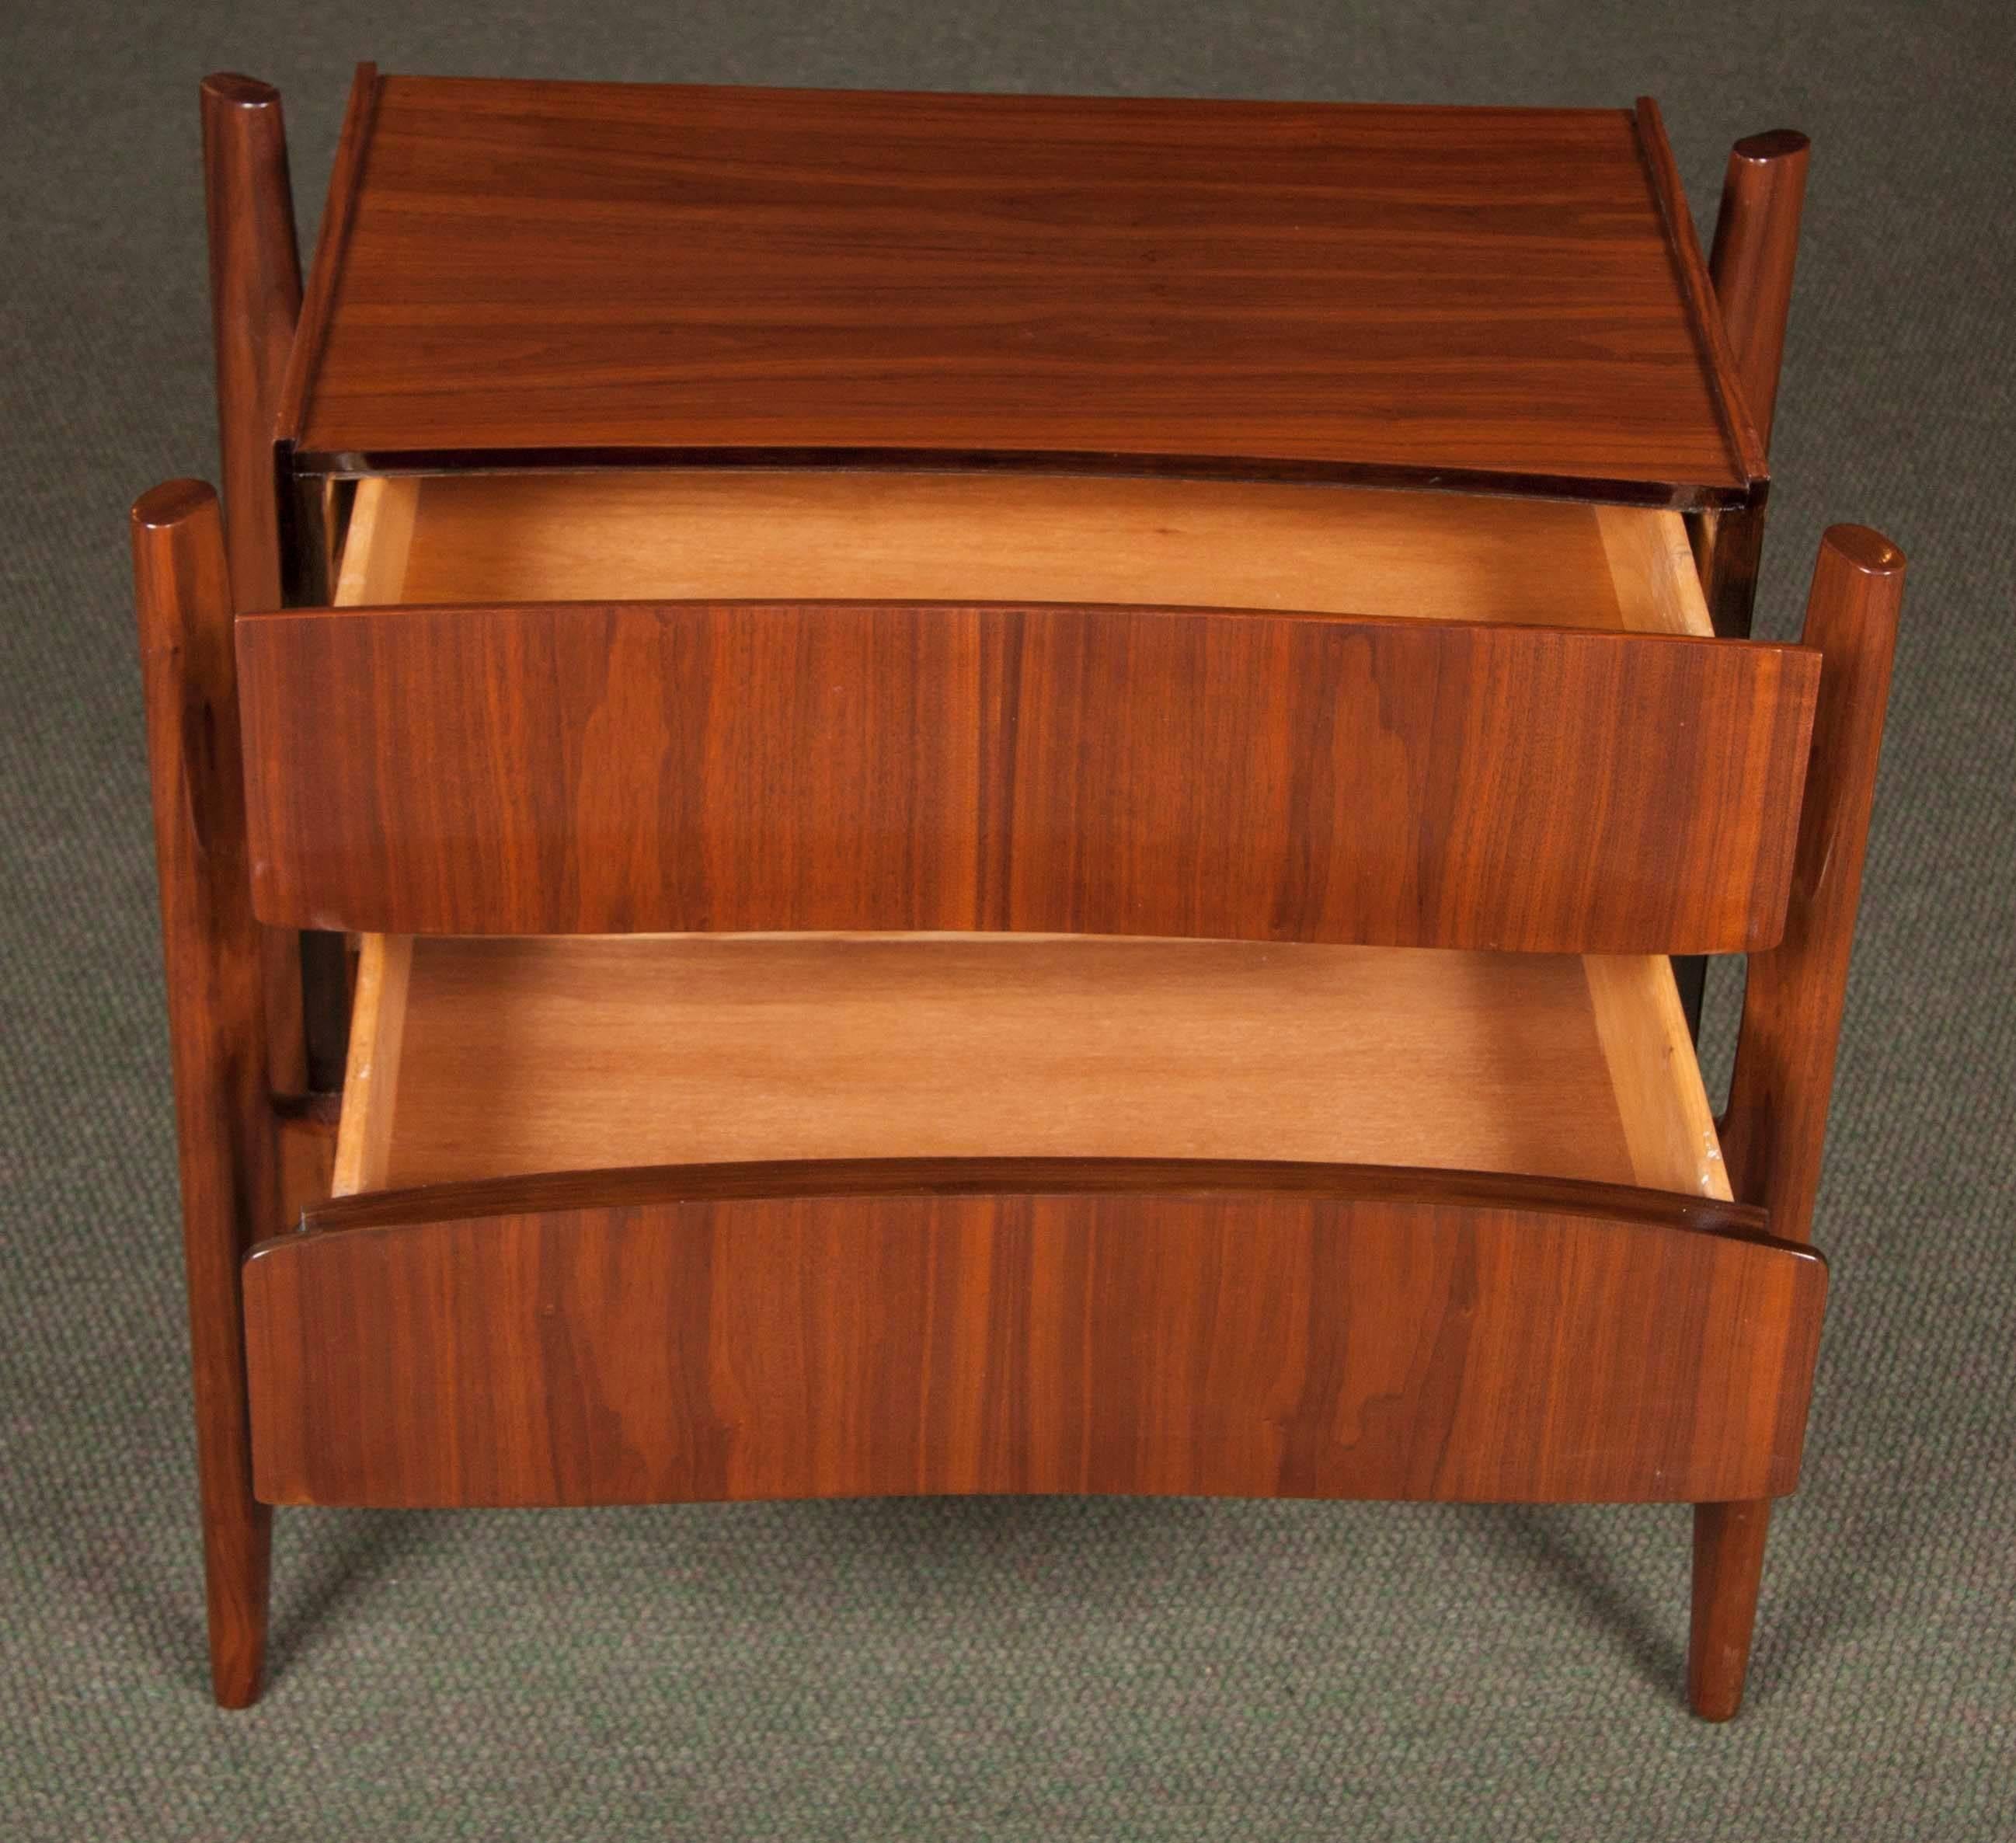 Joinery Pair of Bedside Tables by Edmond Spence